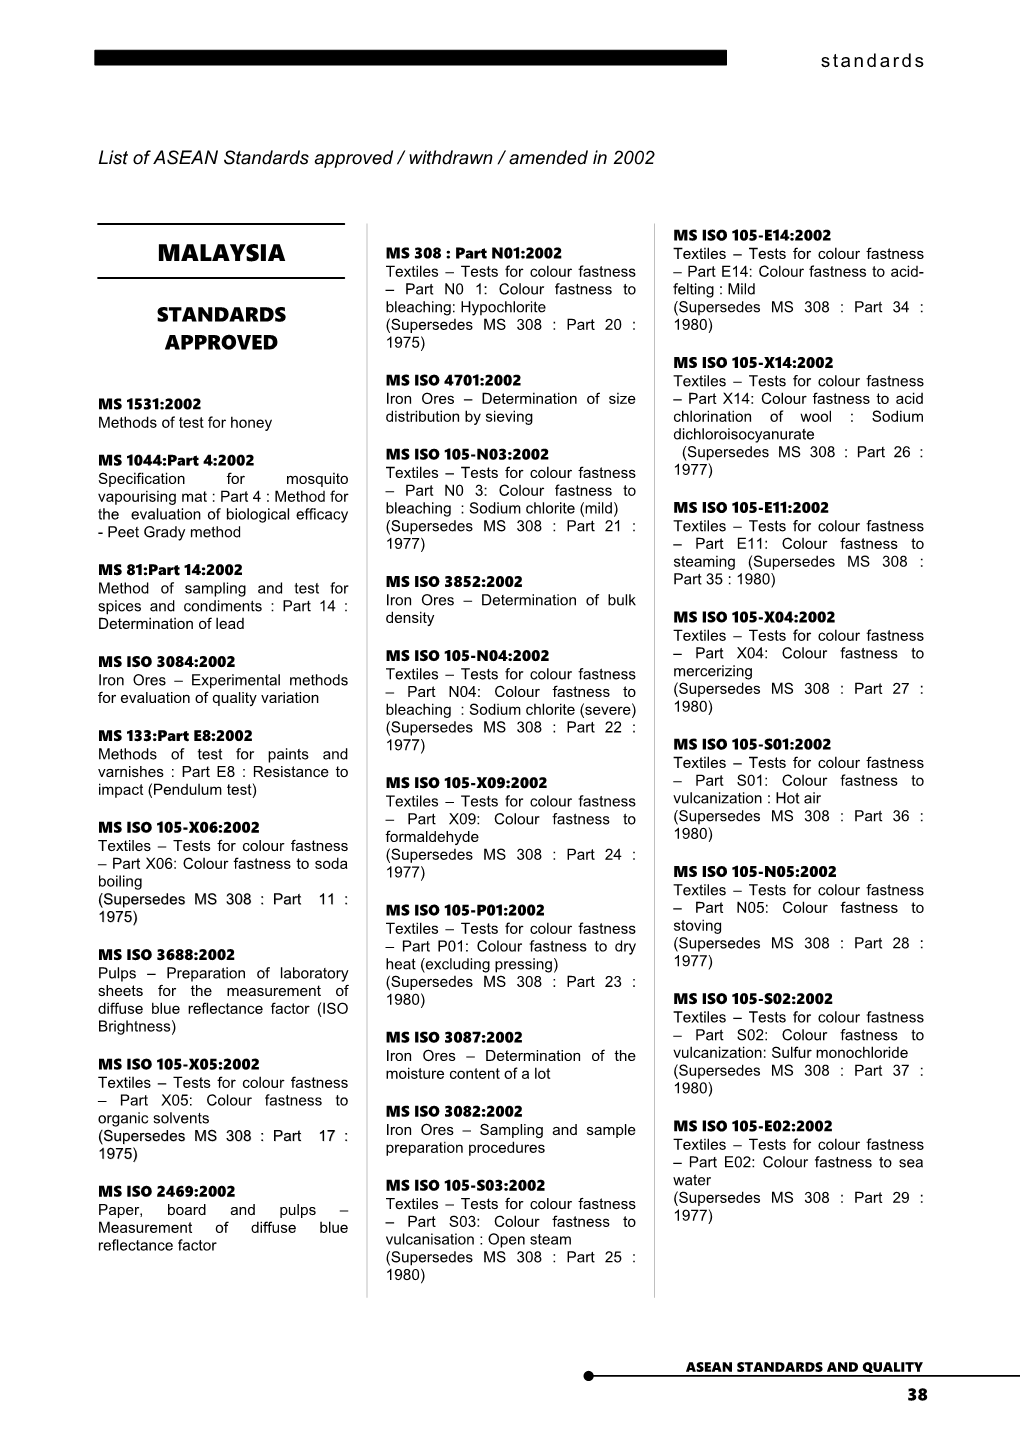 List of ASEAN Standards Approved / Withdrawn / Amended in 2002